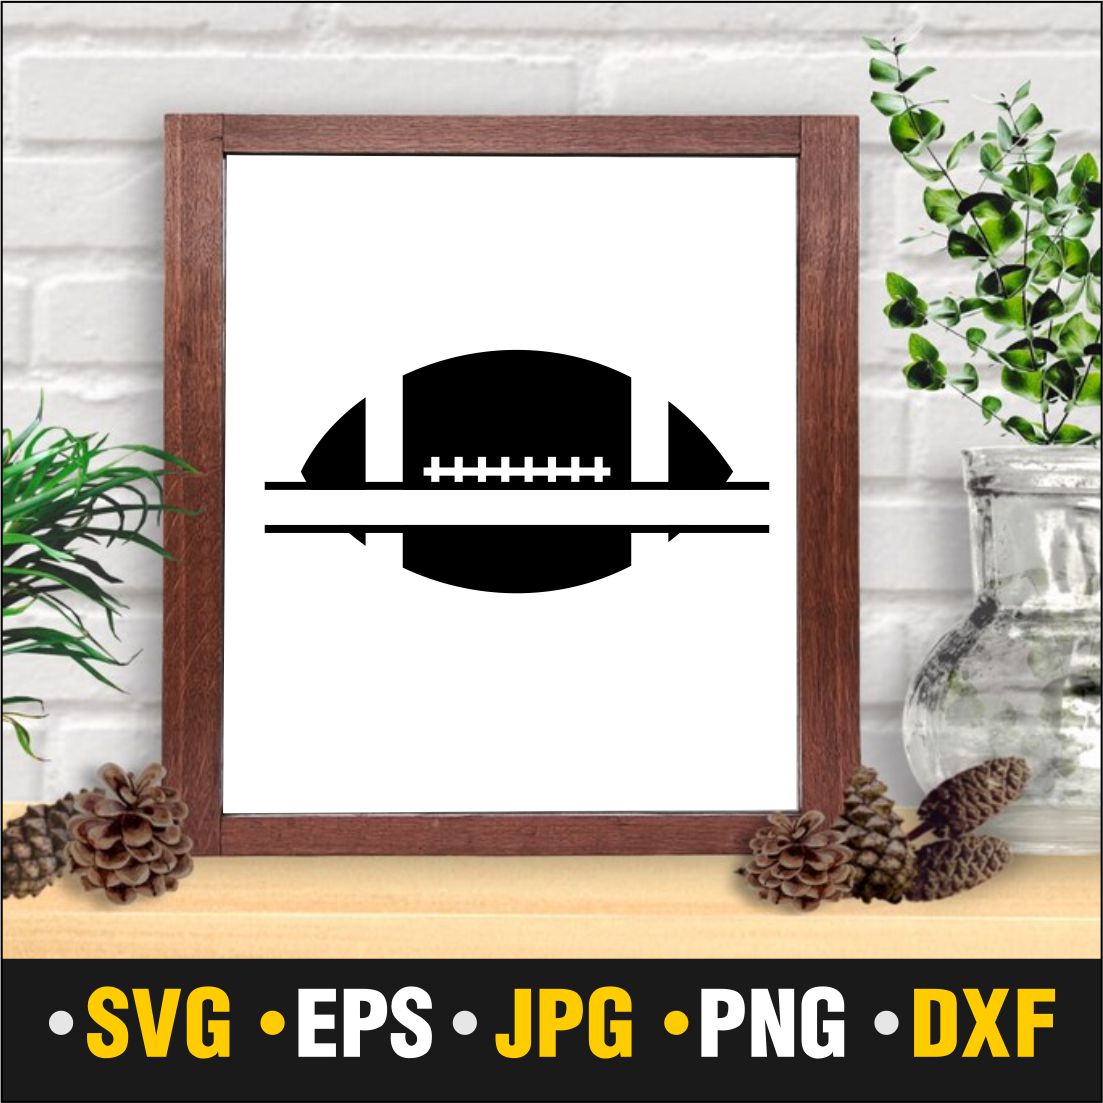 Rugby Ball SVG, JPG , PNG, DXF, EPS cover image.